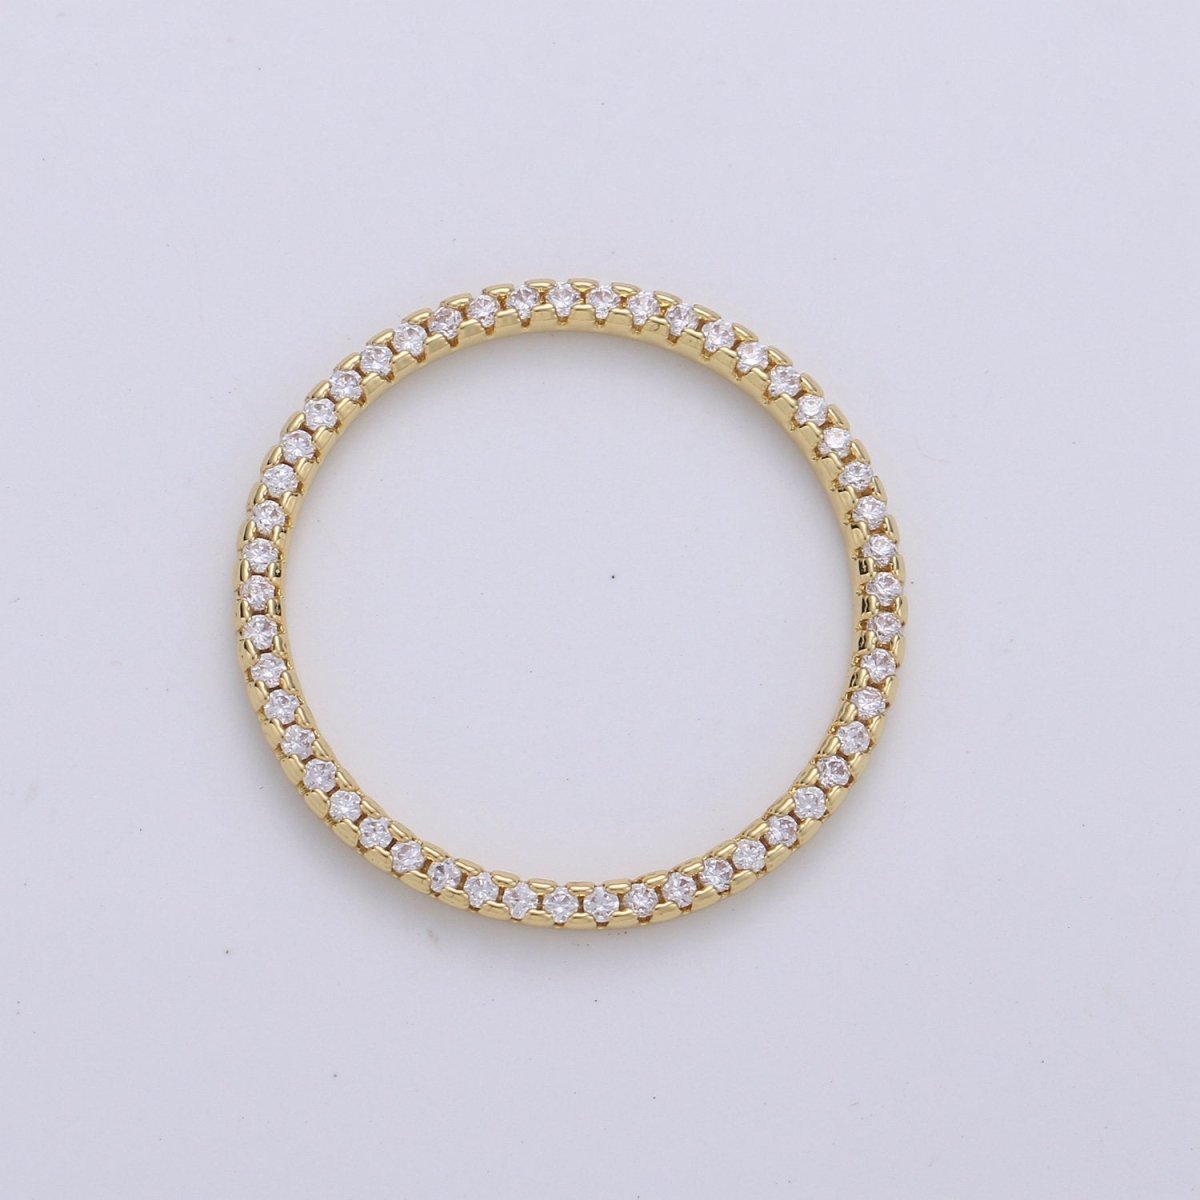 24k Gold Filled Micro Pave Geometric Charm Open Circle Charm, Ring Pendant, Eternity Jewelry, Infinity Circle for Necklace Component D-087 D-098 - DLUXCA